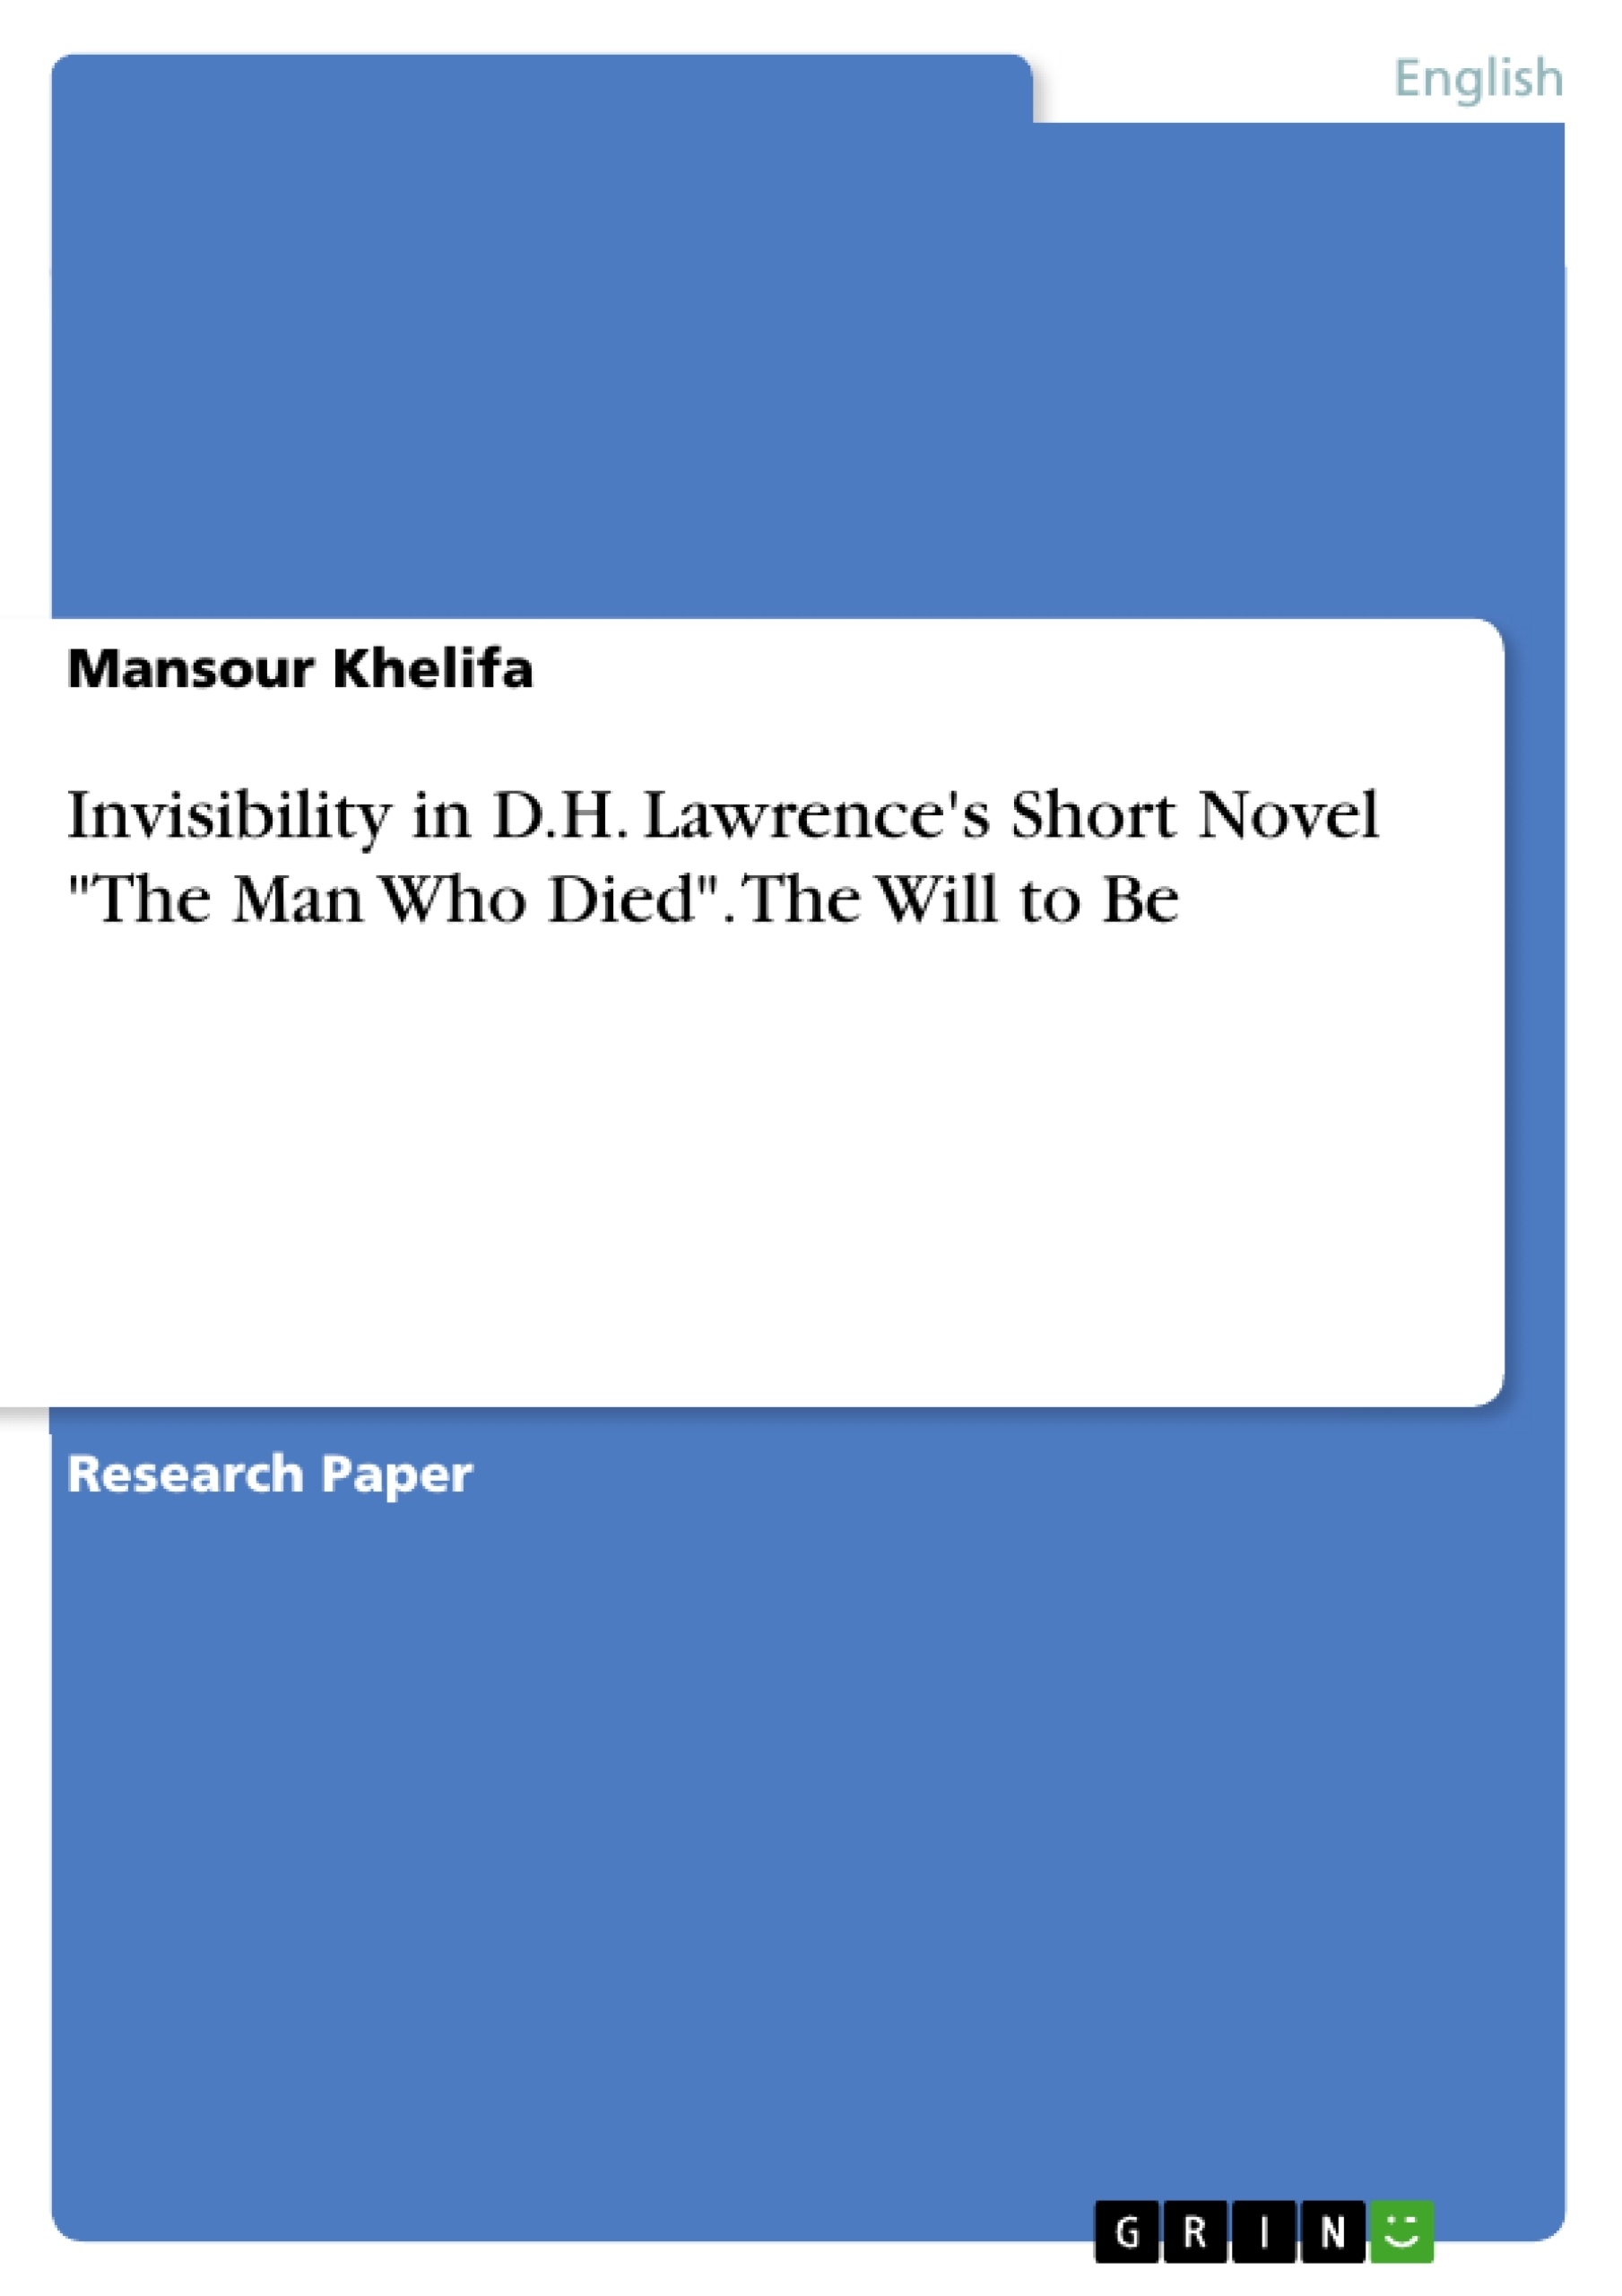 Titre: Invisibility in D.H. Lawrence's Short Novel "The Man Who Died". The Will to Be